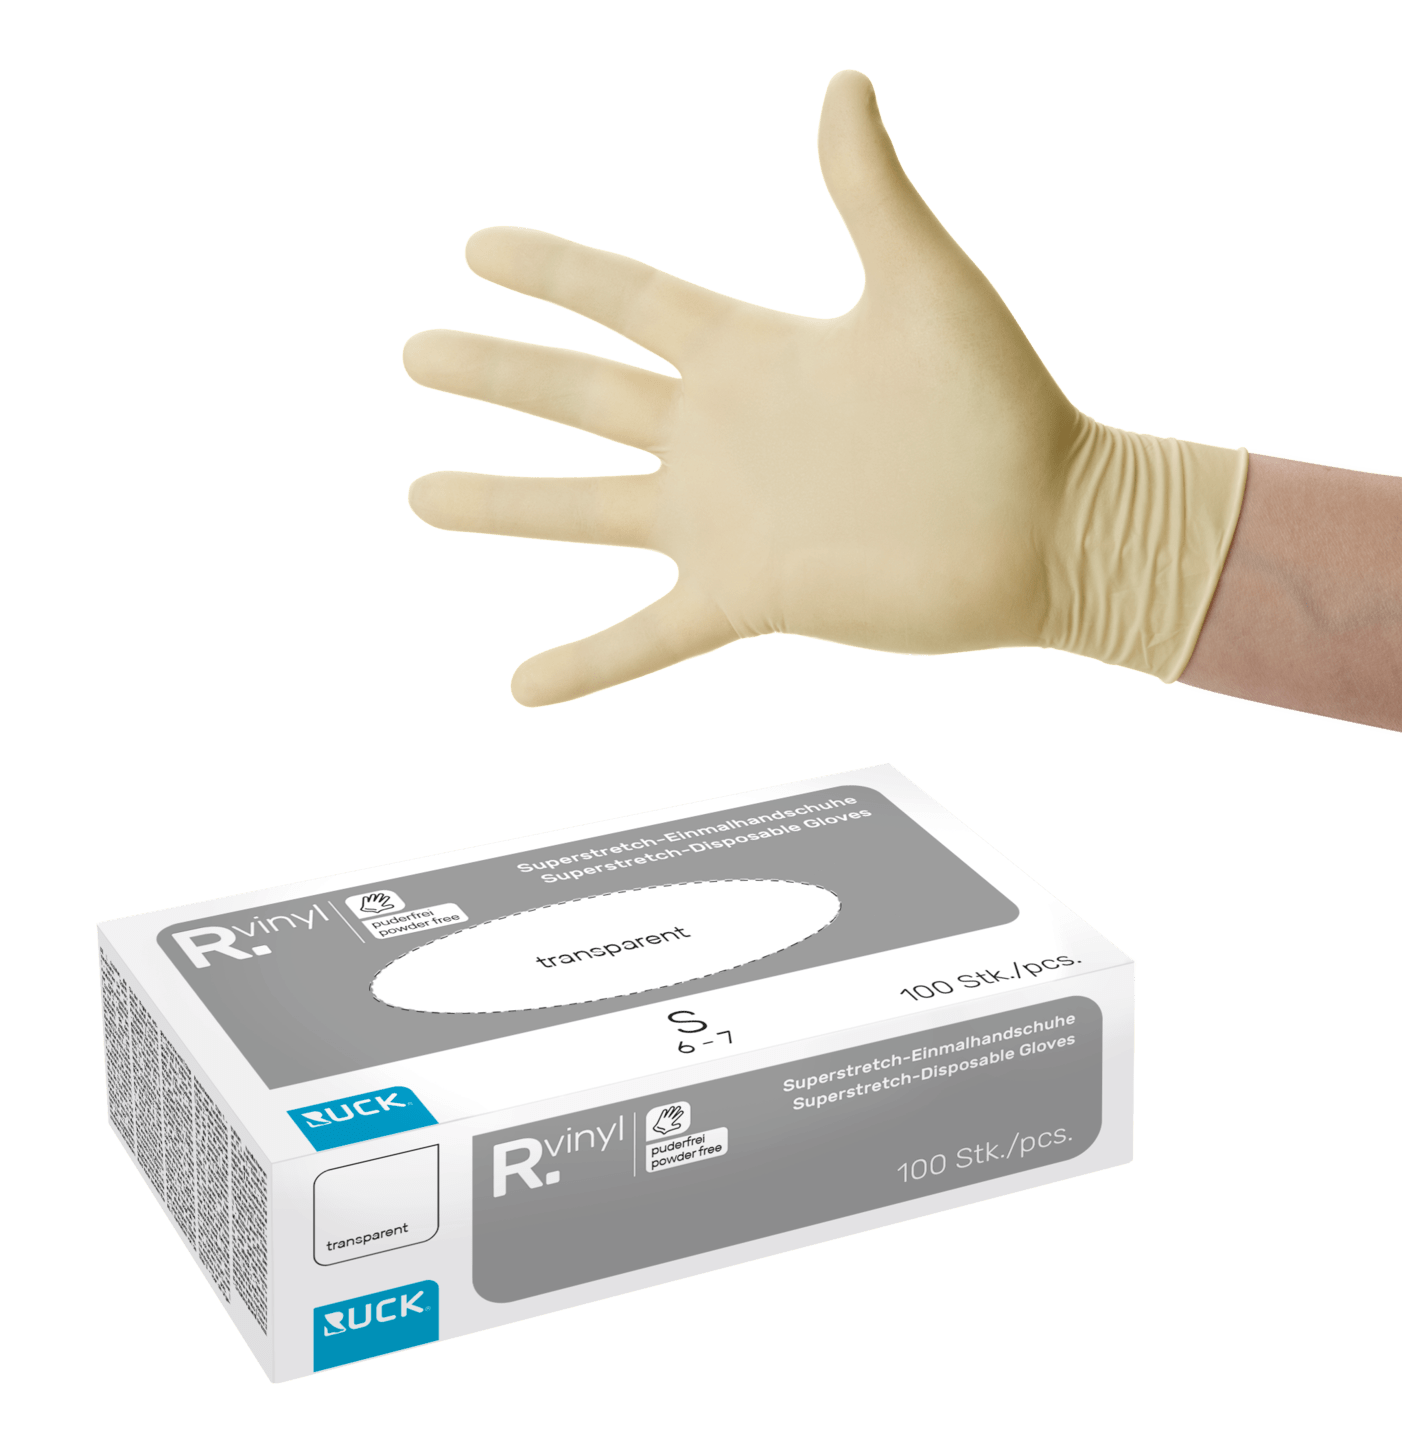 RUCK - Superstretch disposable gloves